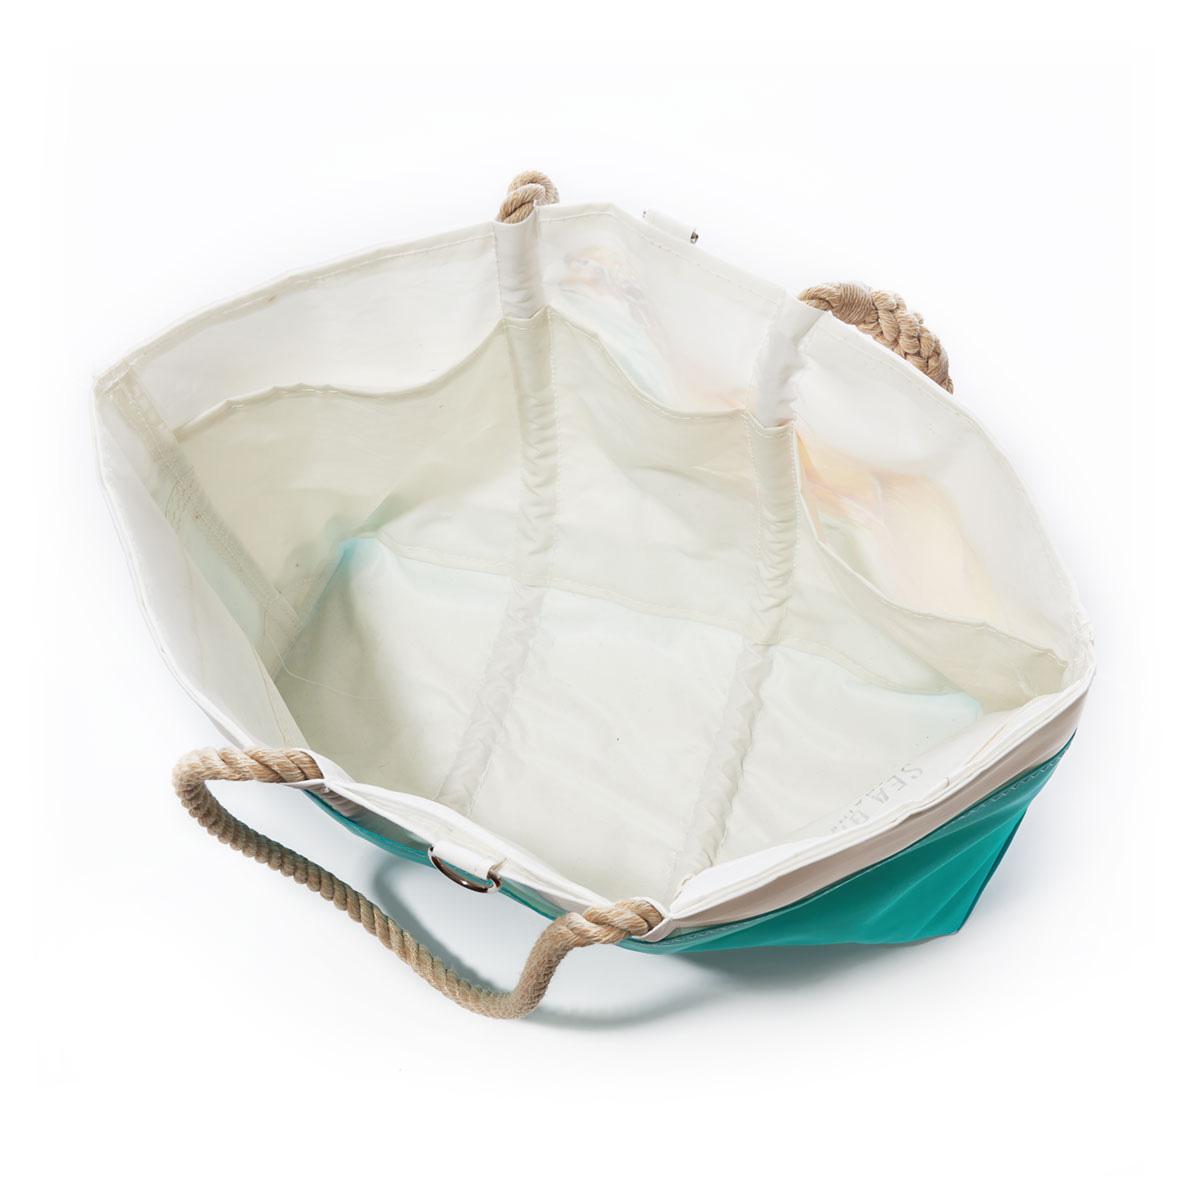 inside view of three interior pocket ina white recycled sail cloth beach tote with hemp rope handles and a teal wraparound back pocket is printed with a bright friendly multicolor sea turtle